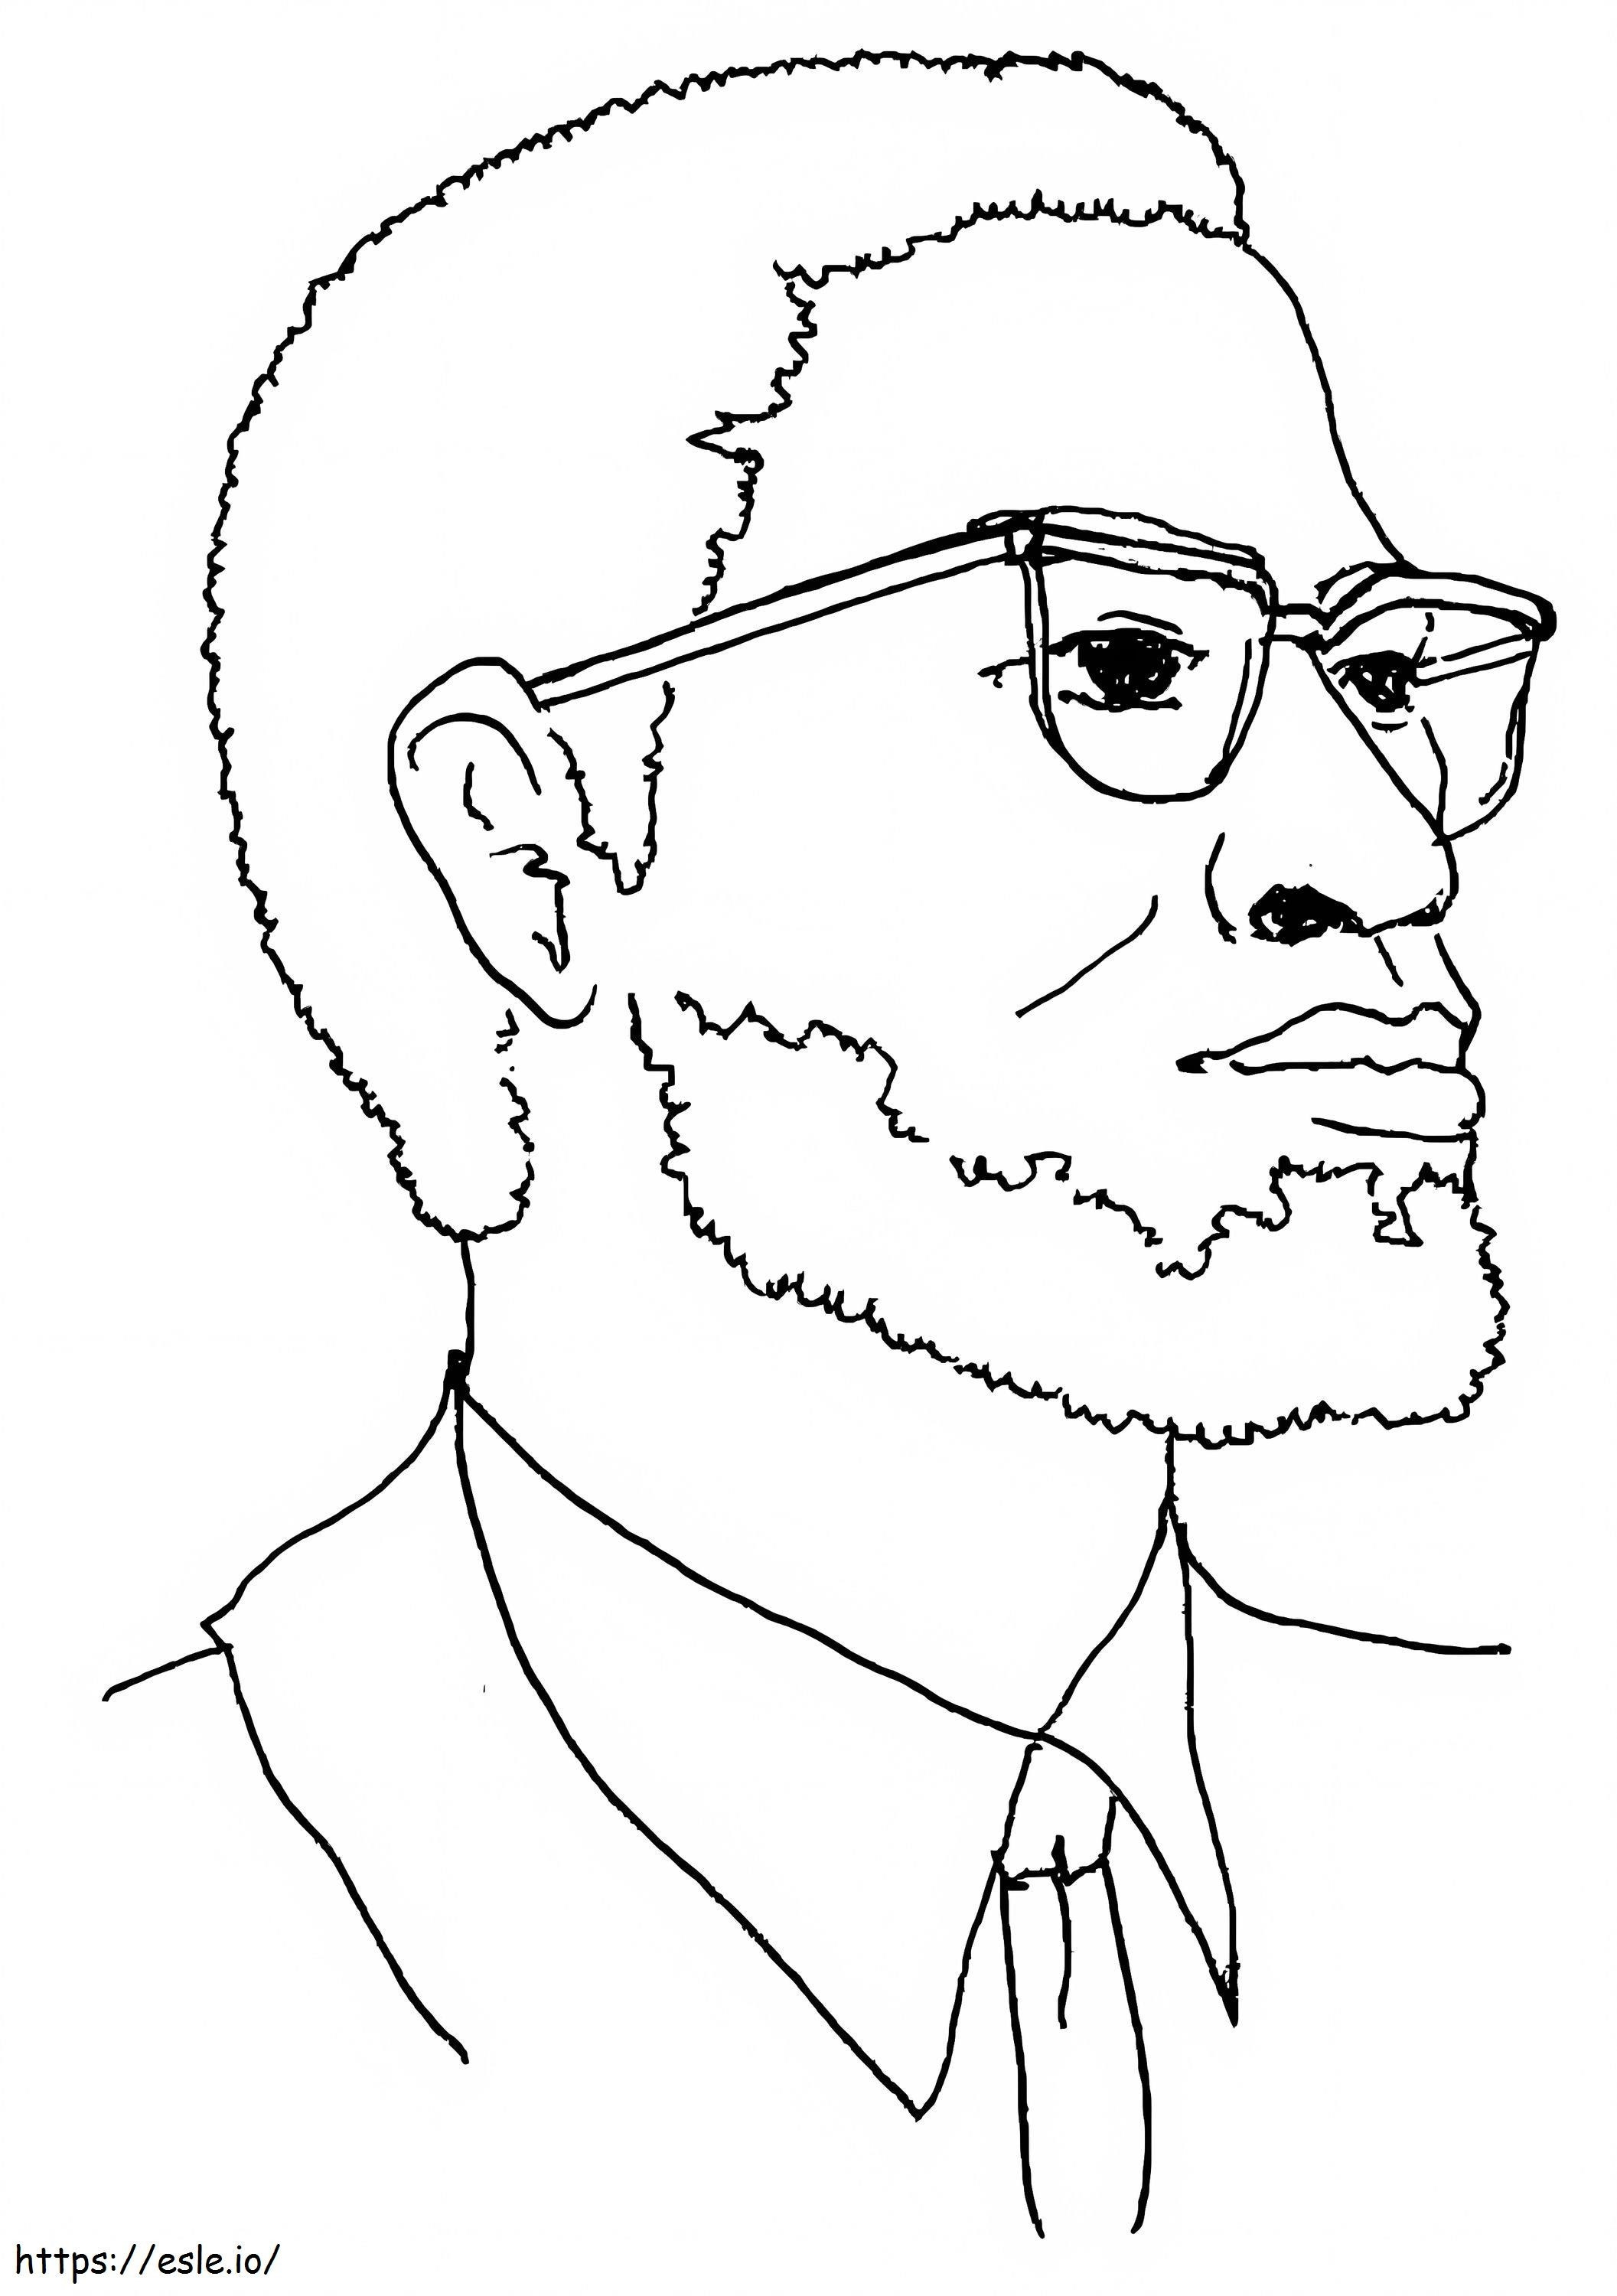 Malcolm X 3 coloring page